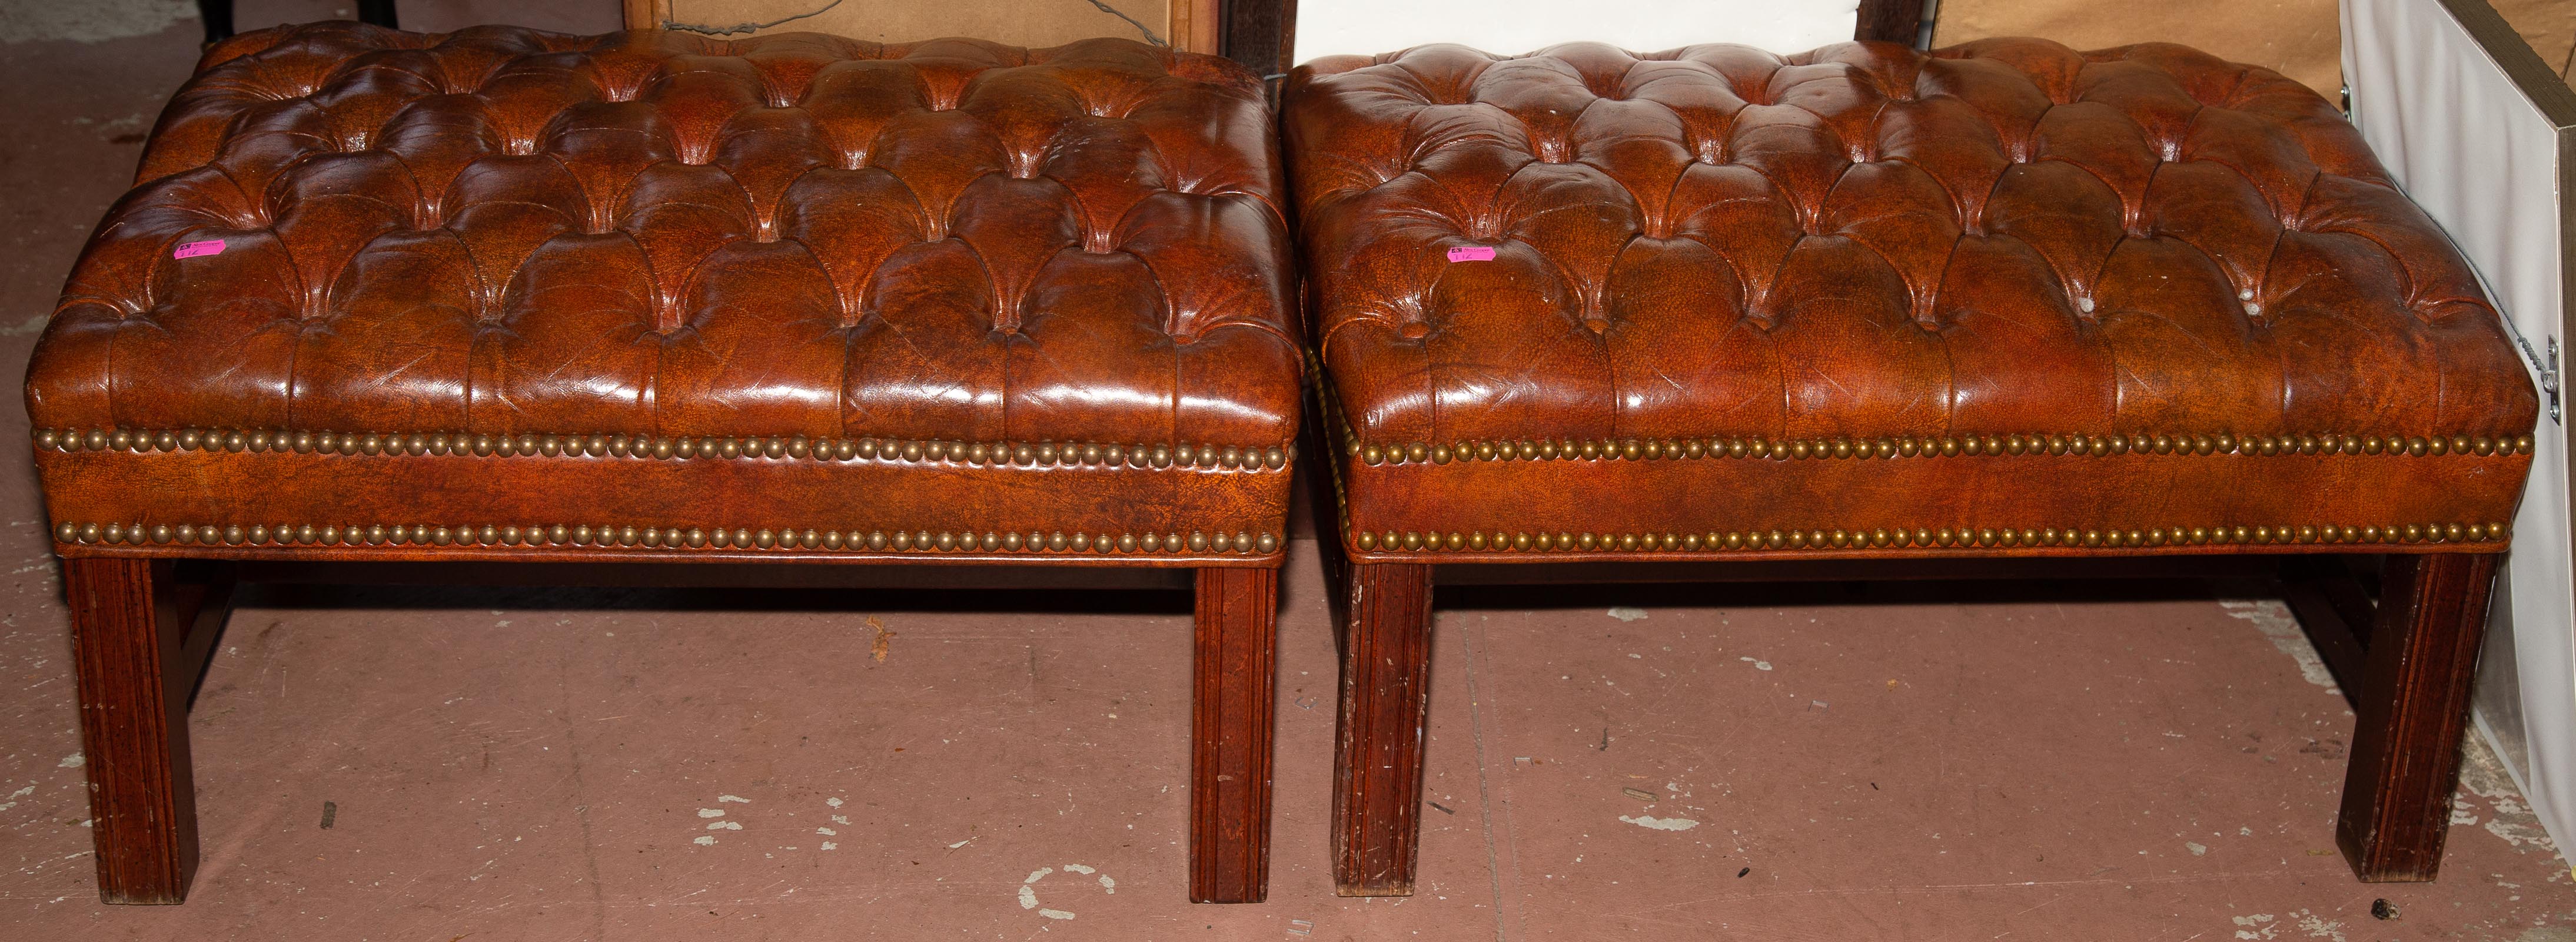 TWO FAUX LEATHER OTTOMANS located 36a2b0